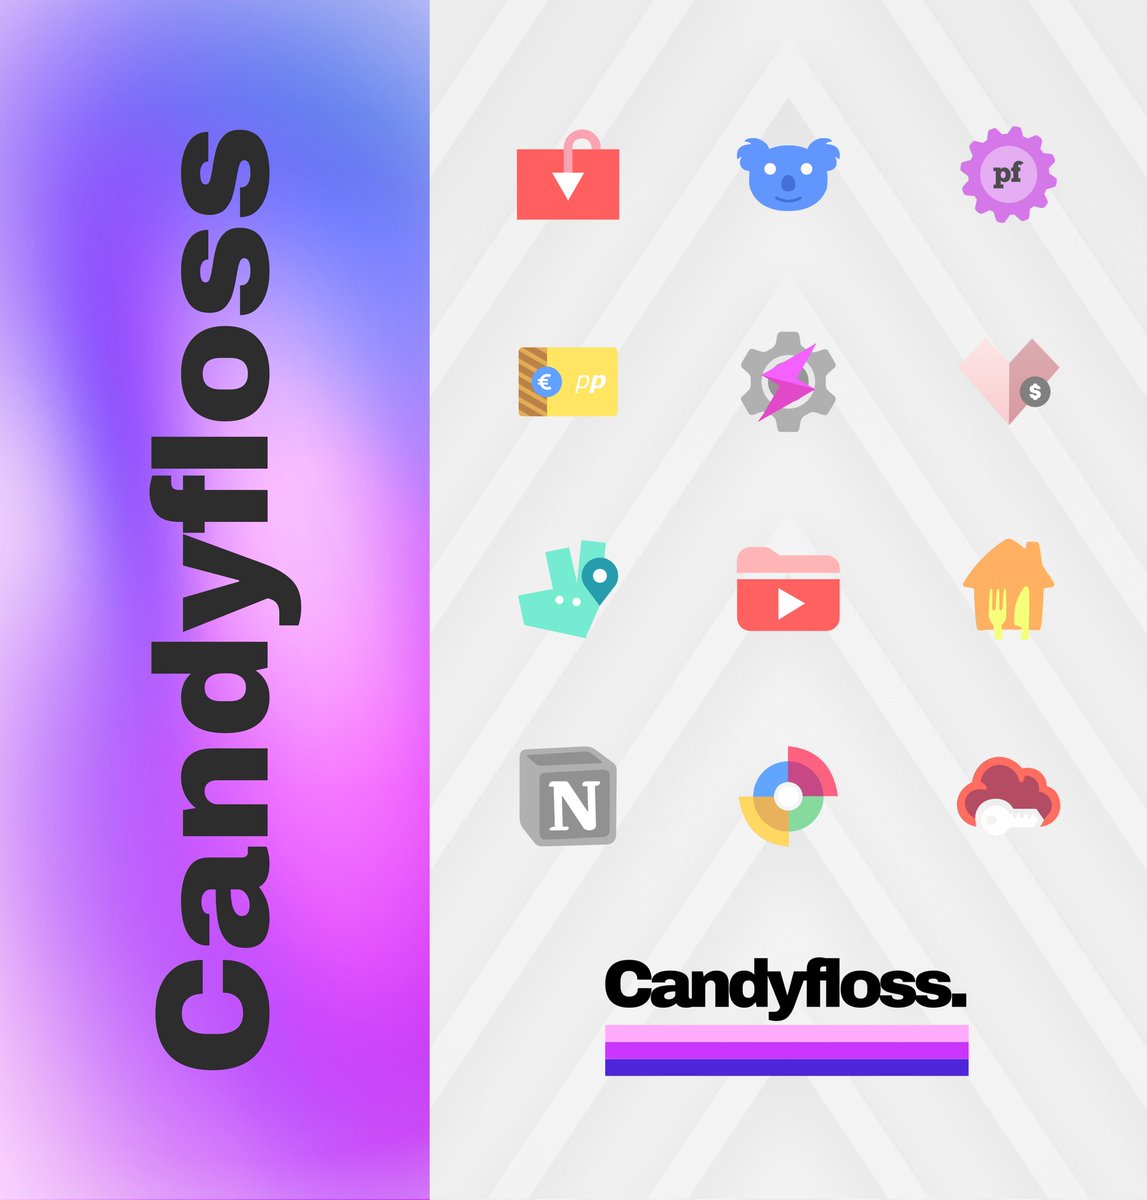 Big update for Candyfloss is live! 🔸2nd update of the week! 🔸35 new icons! 🔸20 premium icons themed! 🔸850+ total icons now! Getting close to full release now! So get it at EARLY ACCESS PRICE right now: bit.ly/CandyflossIcons RTs and ❤️s ll be highly appreciated! Cheers!